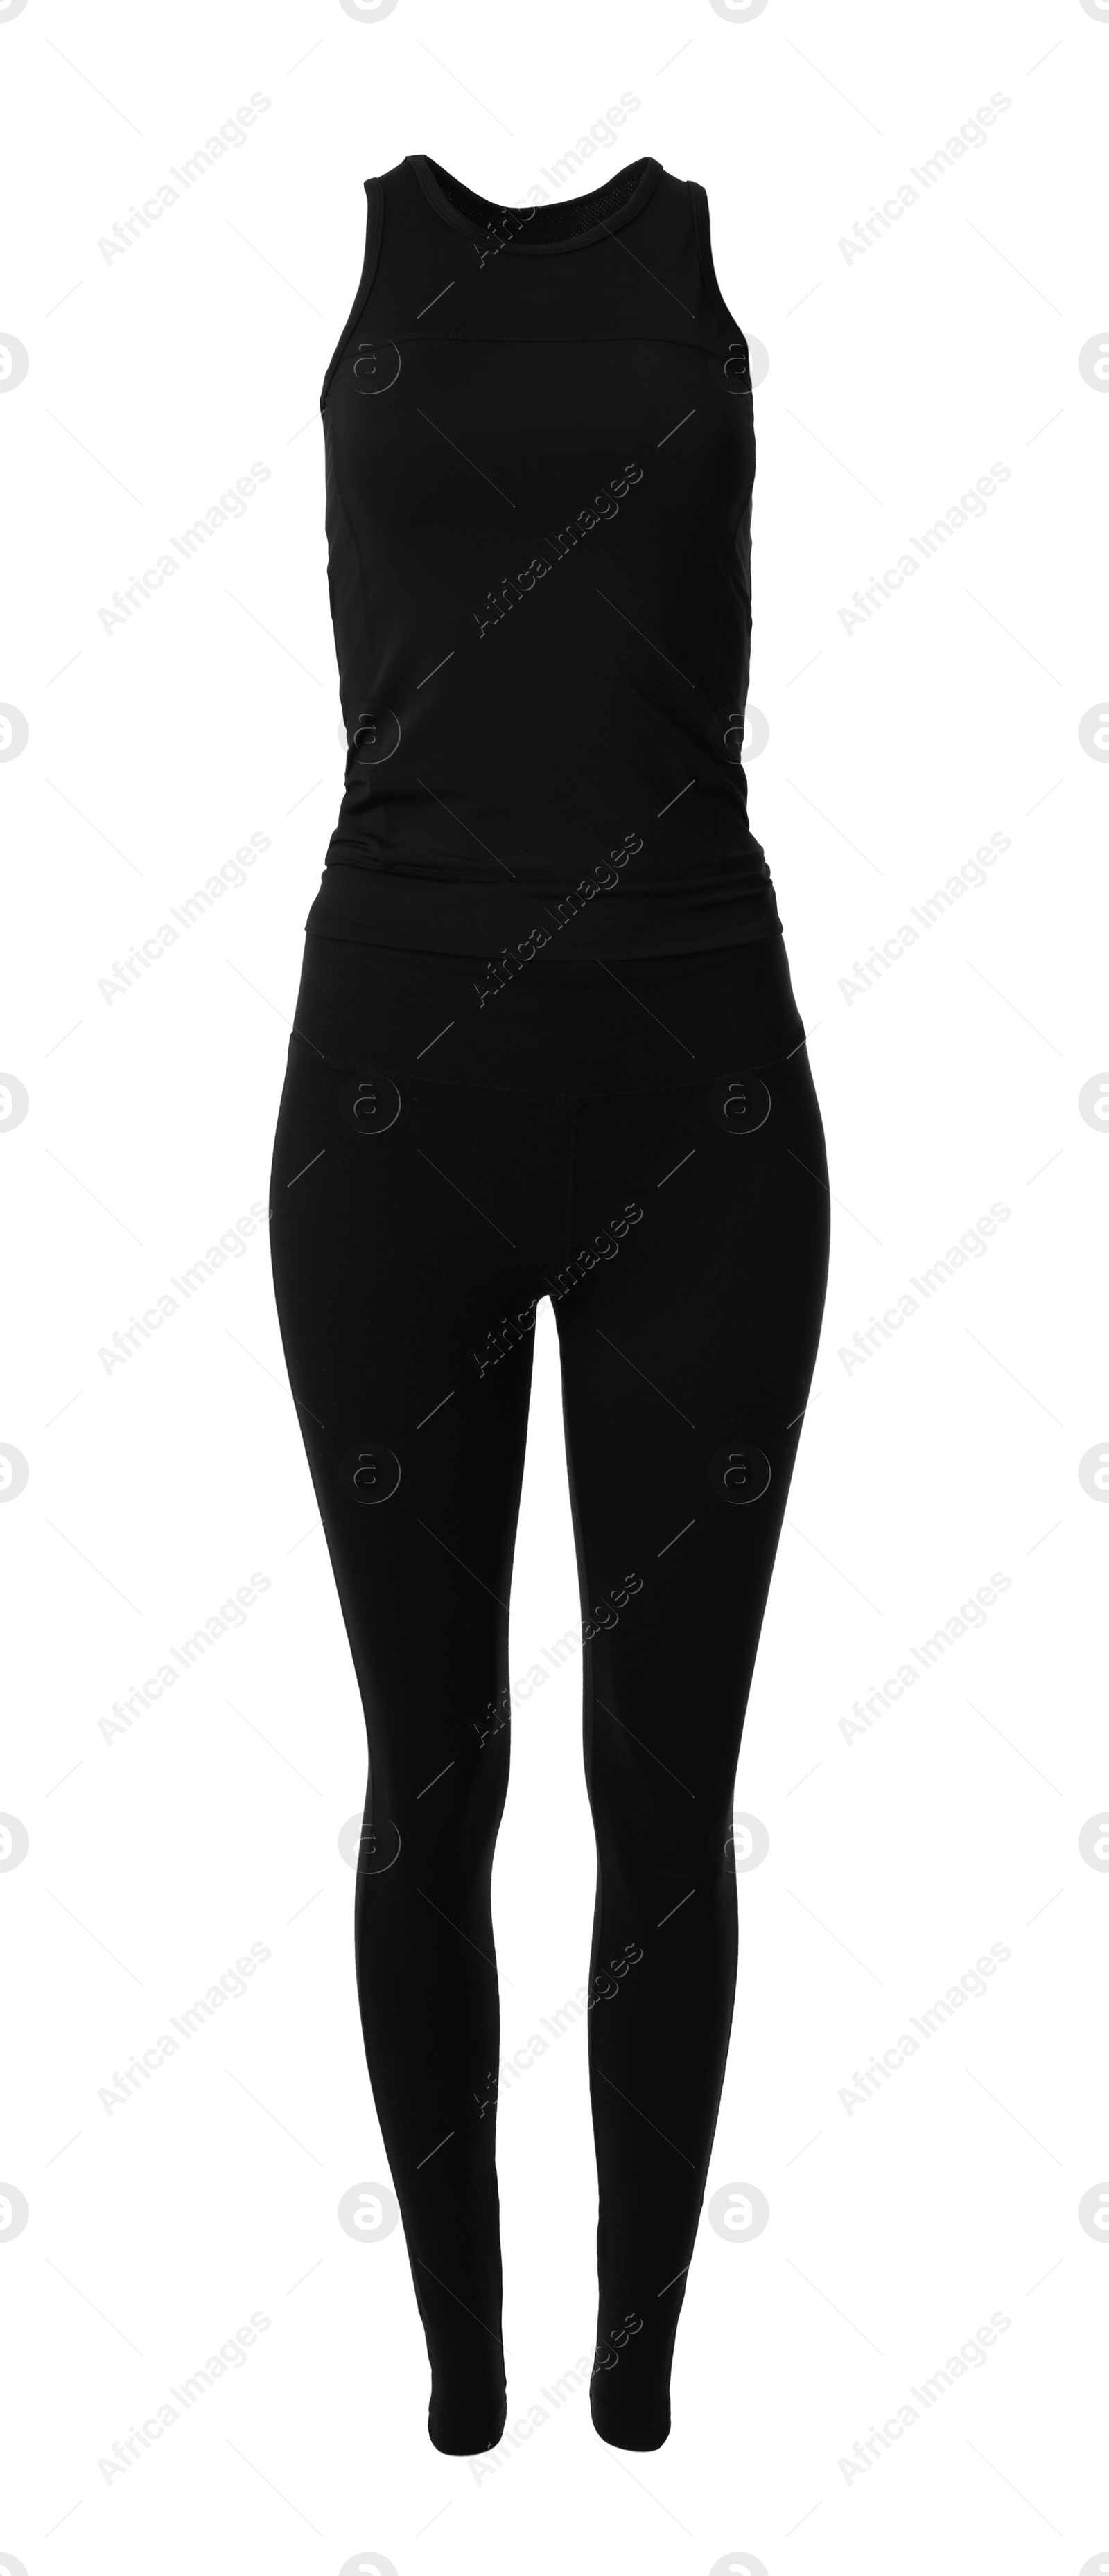 Photo of New black women's sport clothes isolated on white